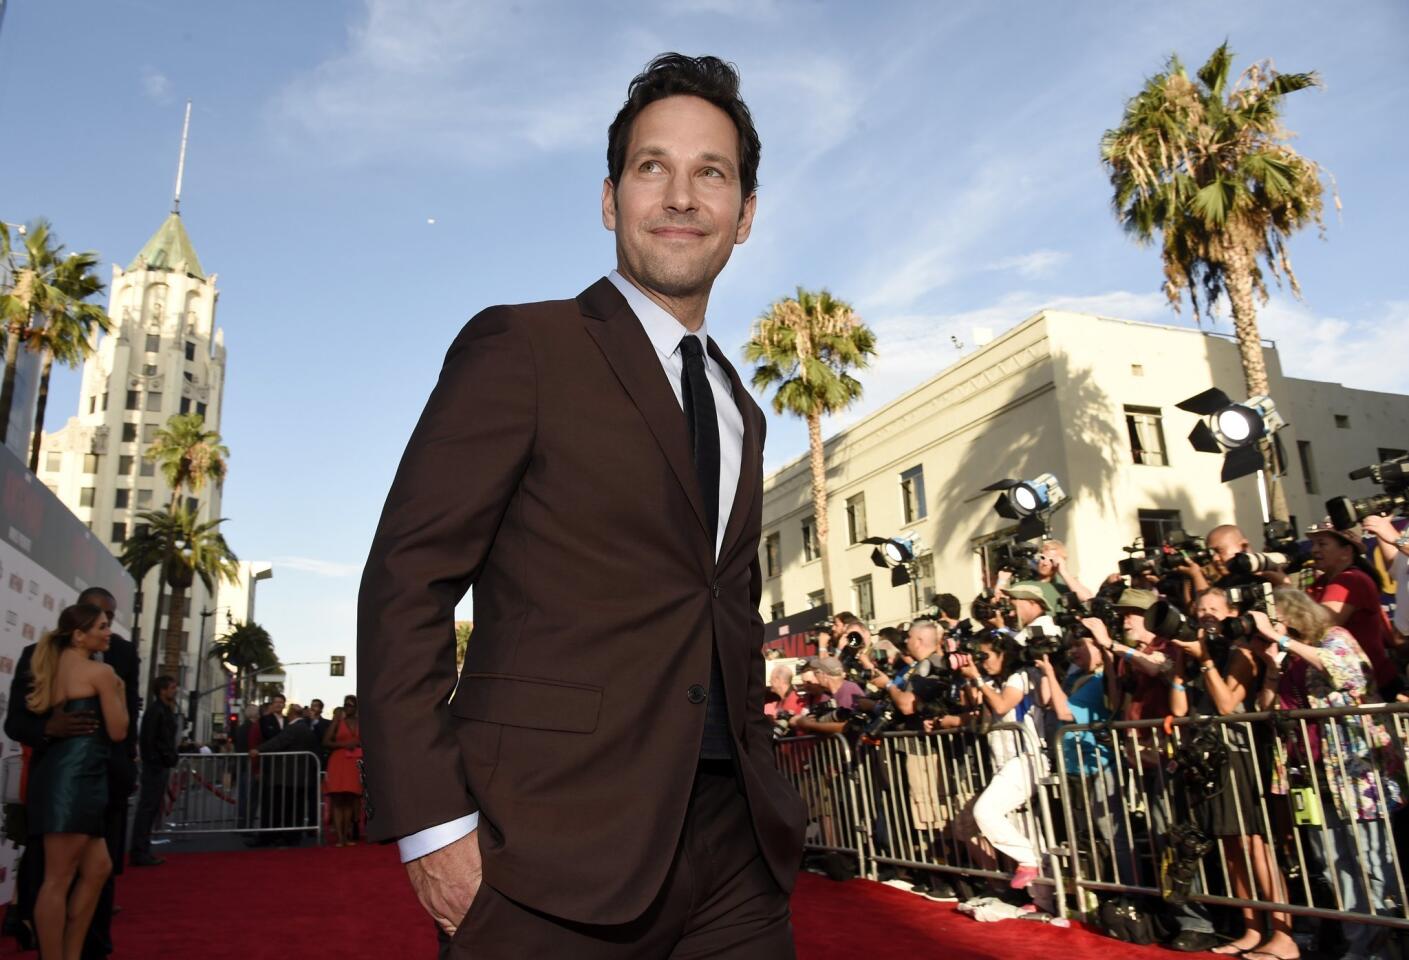 Paul Rudd, star of "Ant-Man," walks the red carpet at the premiere of the film.